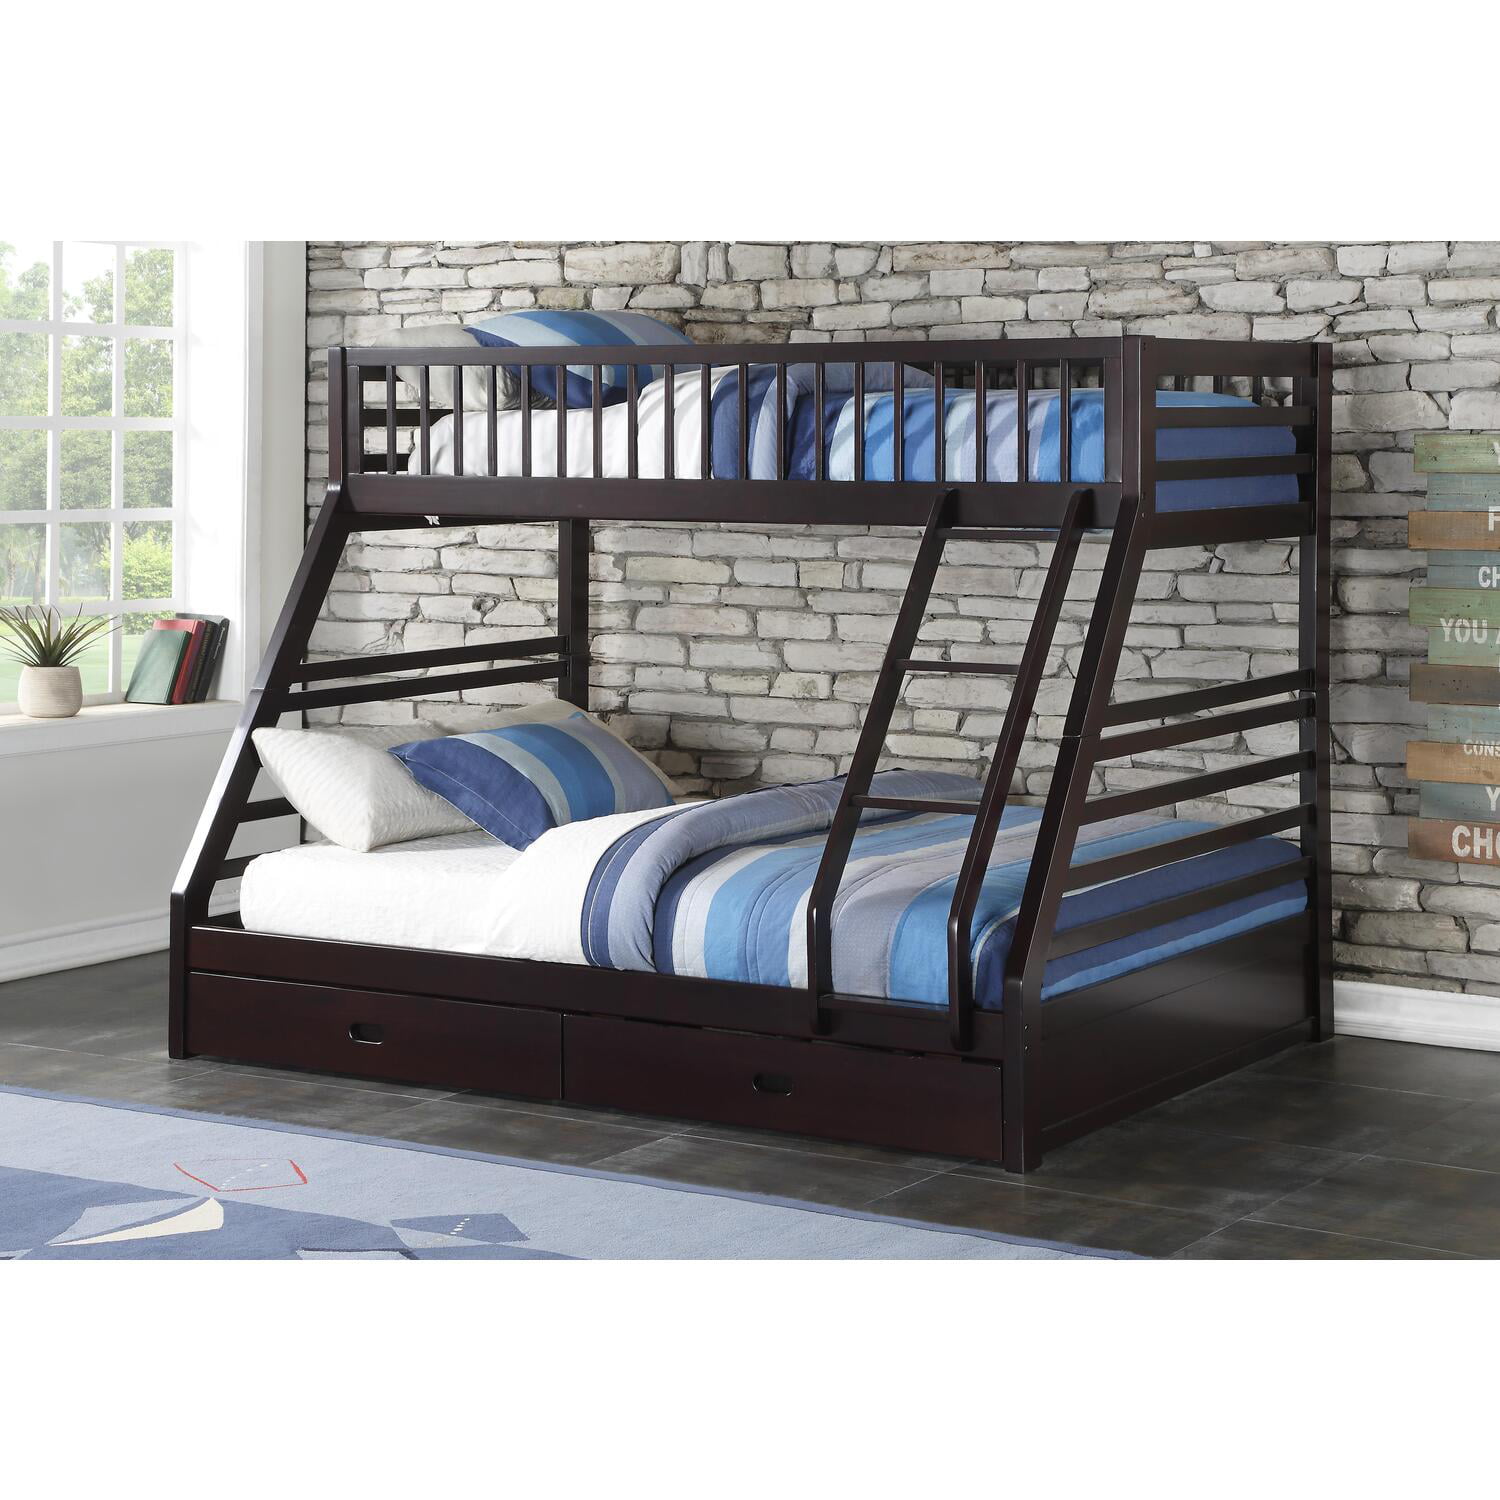 Acme Furniture Jason Xl Twin Over Queen, Acme Bunk Bed Reviews